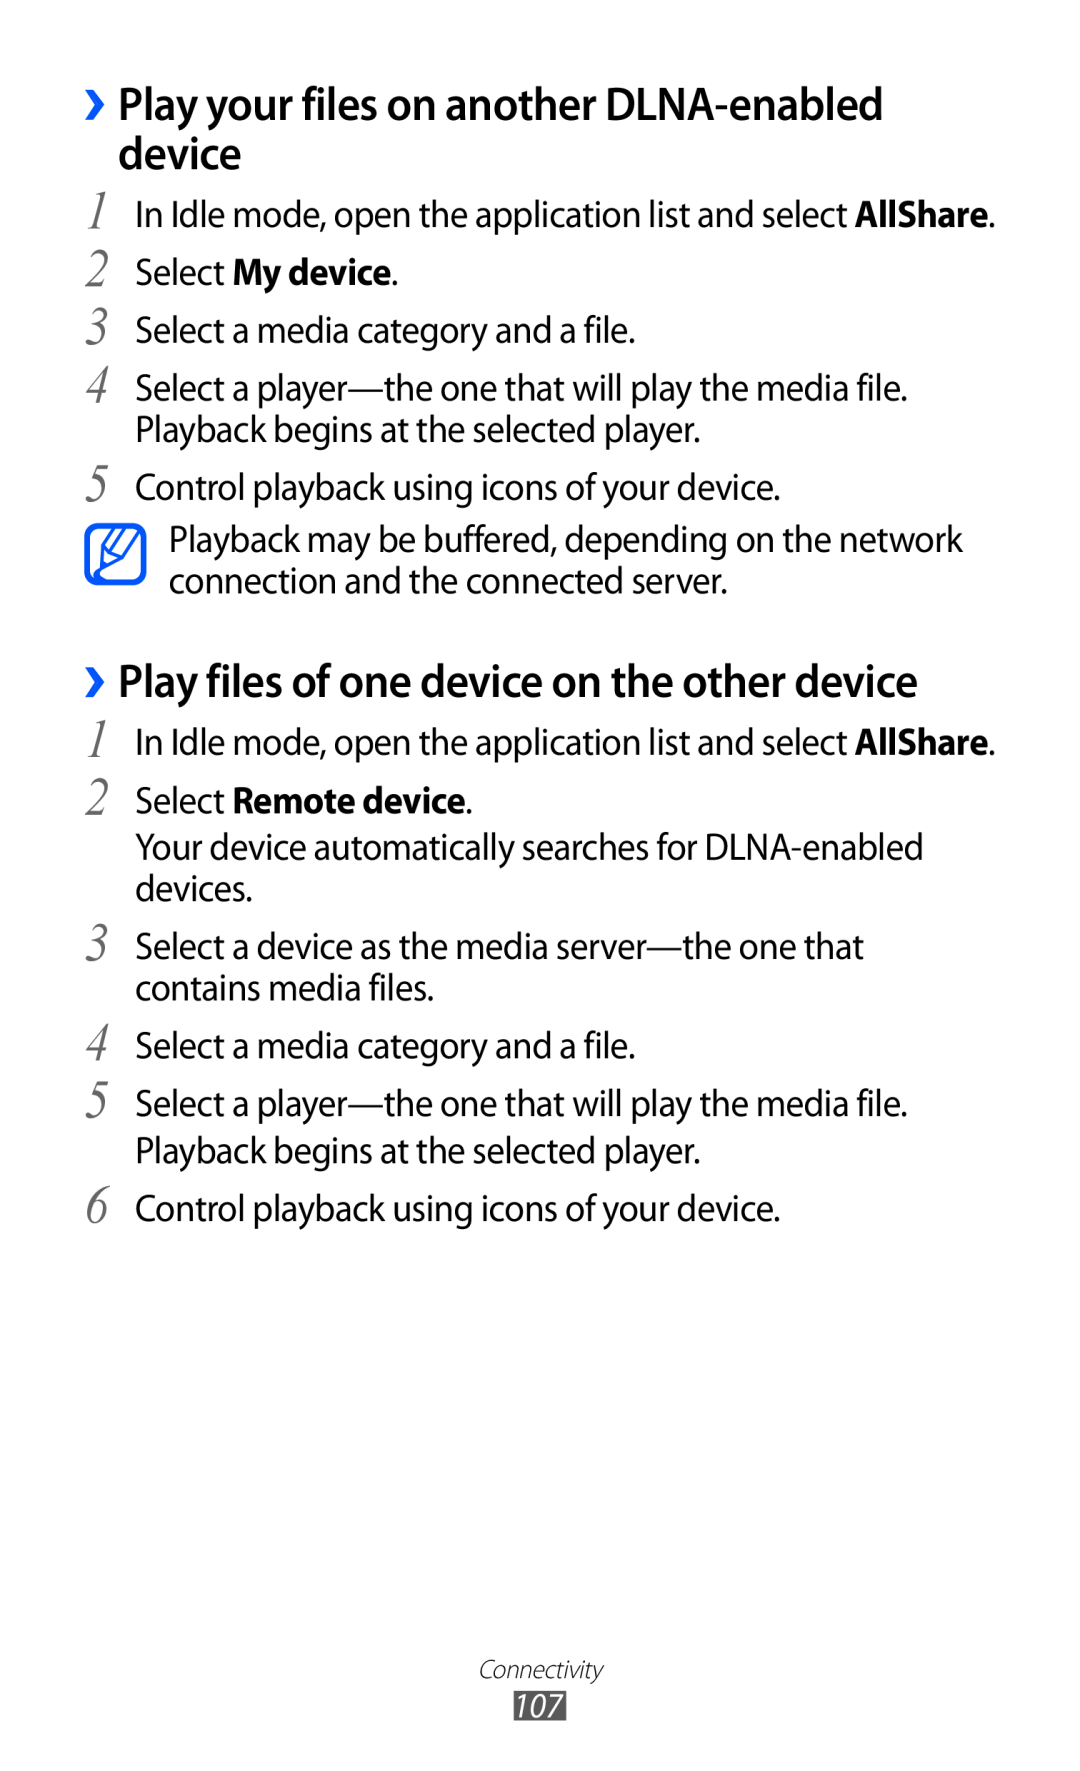 Samsung GT-I9070MSAXXV ››Play your files on another DLNA-enabled device, ››Play files of one device on the other device 